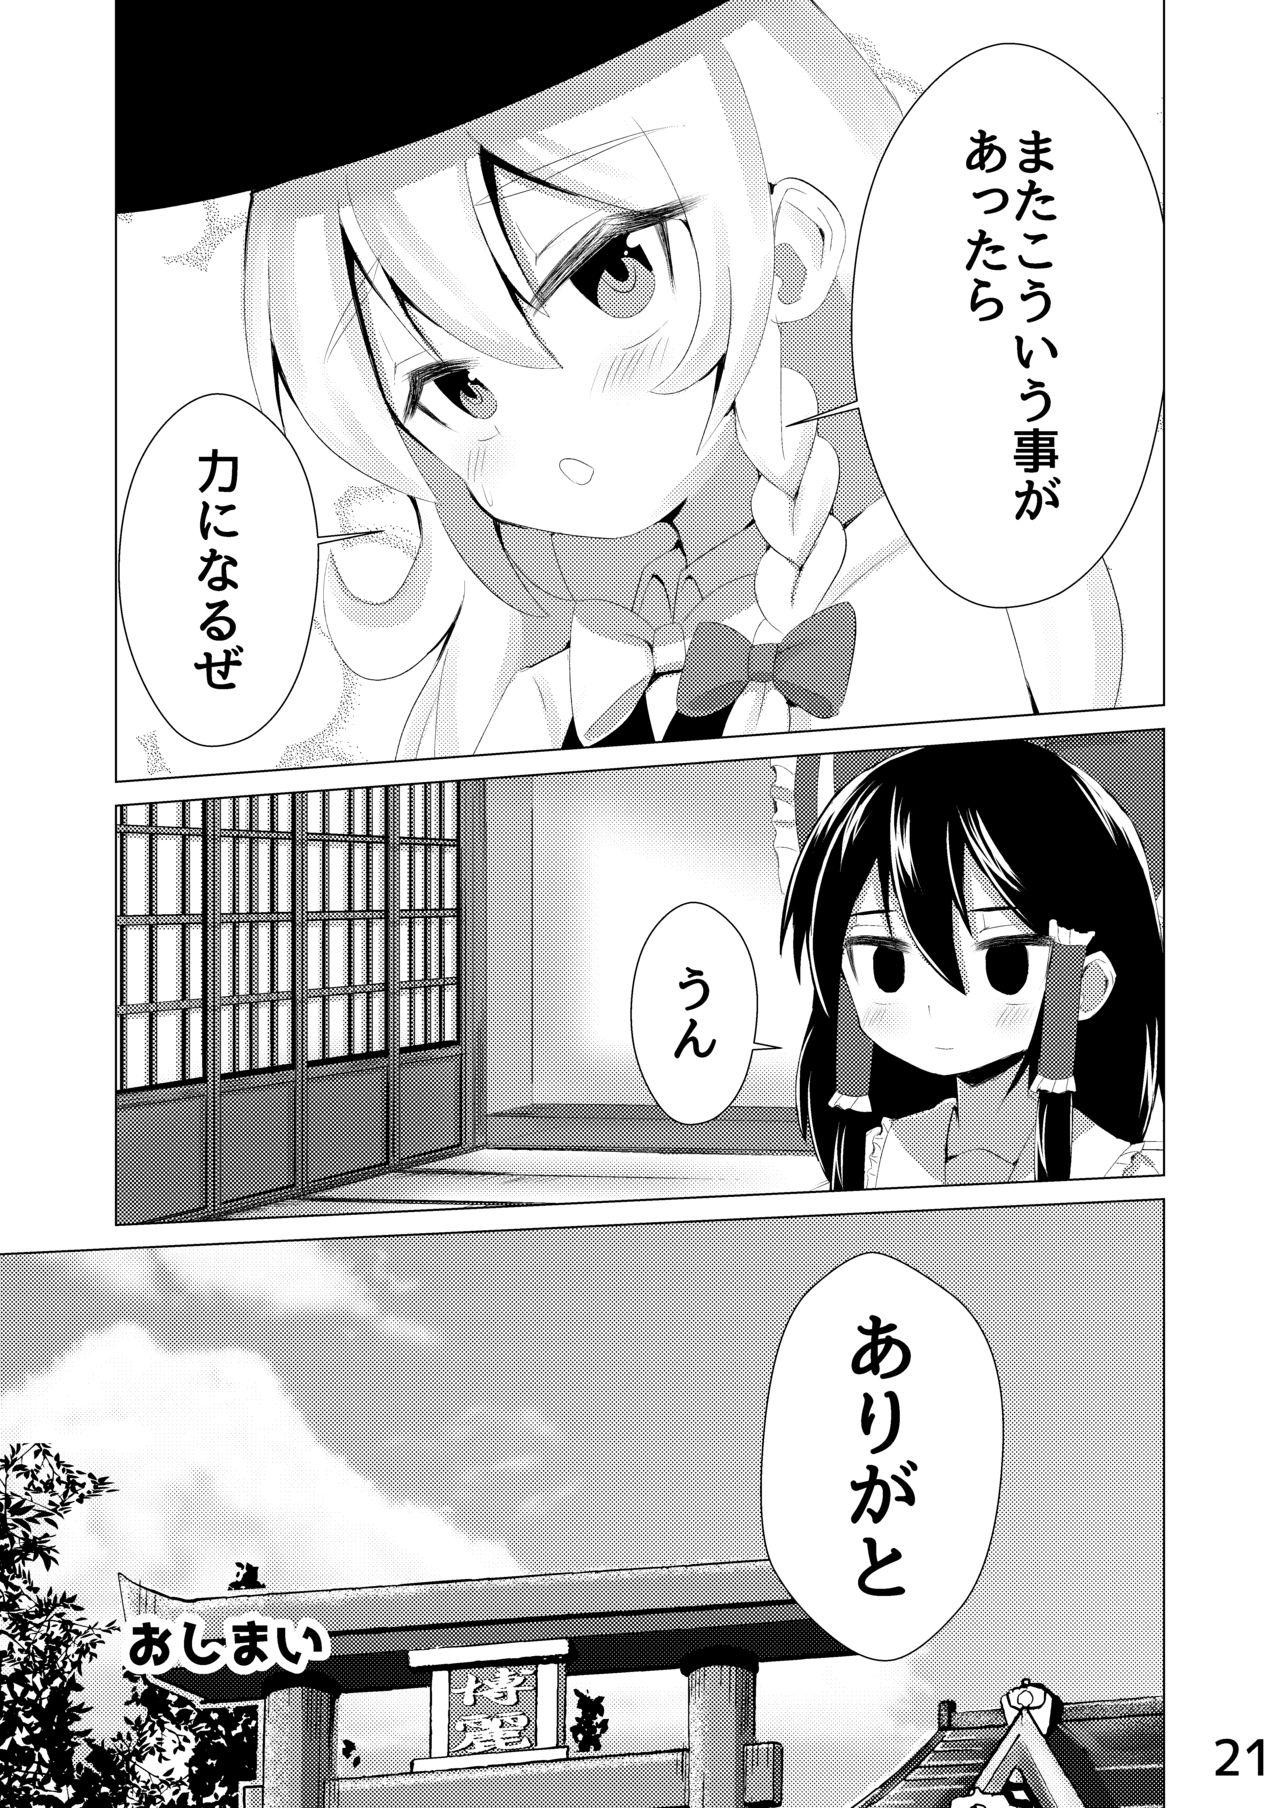 Milfs [NO相撲KING (吸斬) 生えた (Touhou Project) [Digital] - Touhou project Tites - Page 22